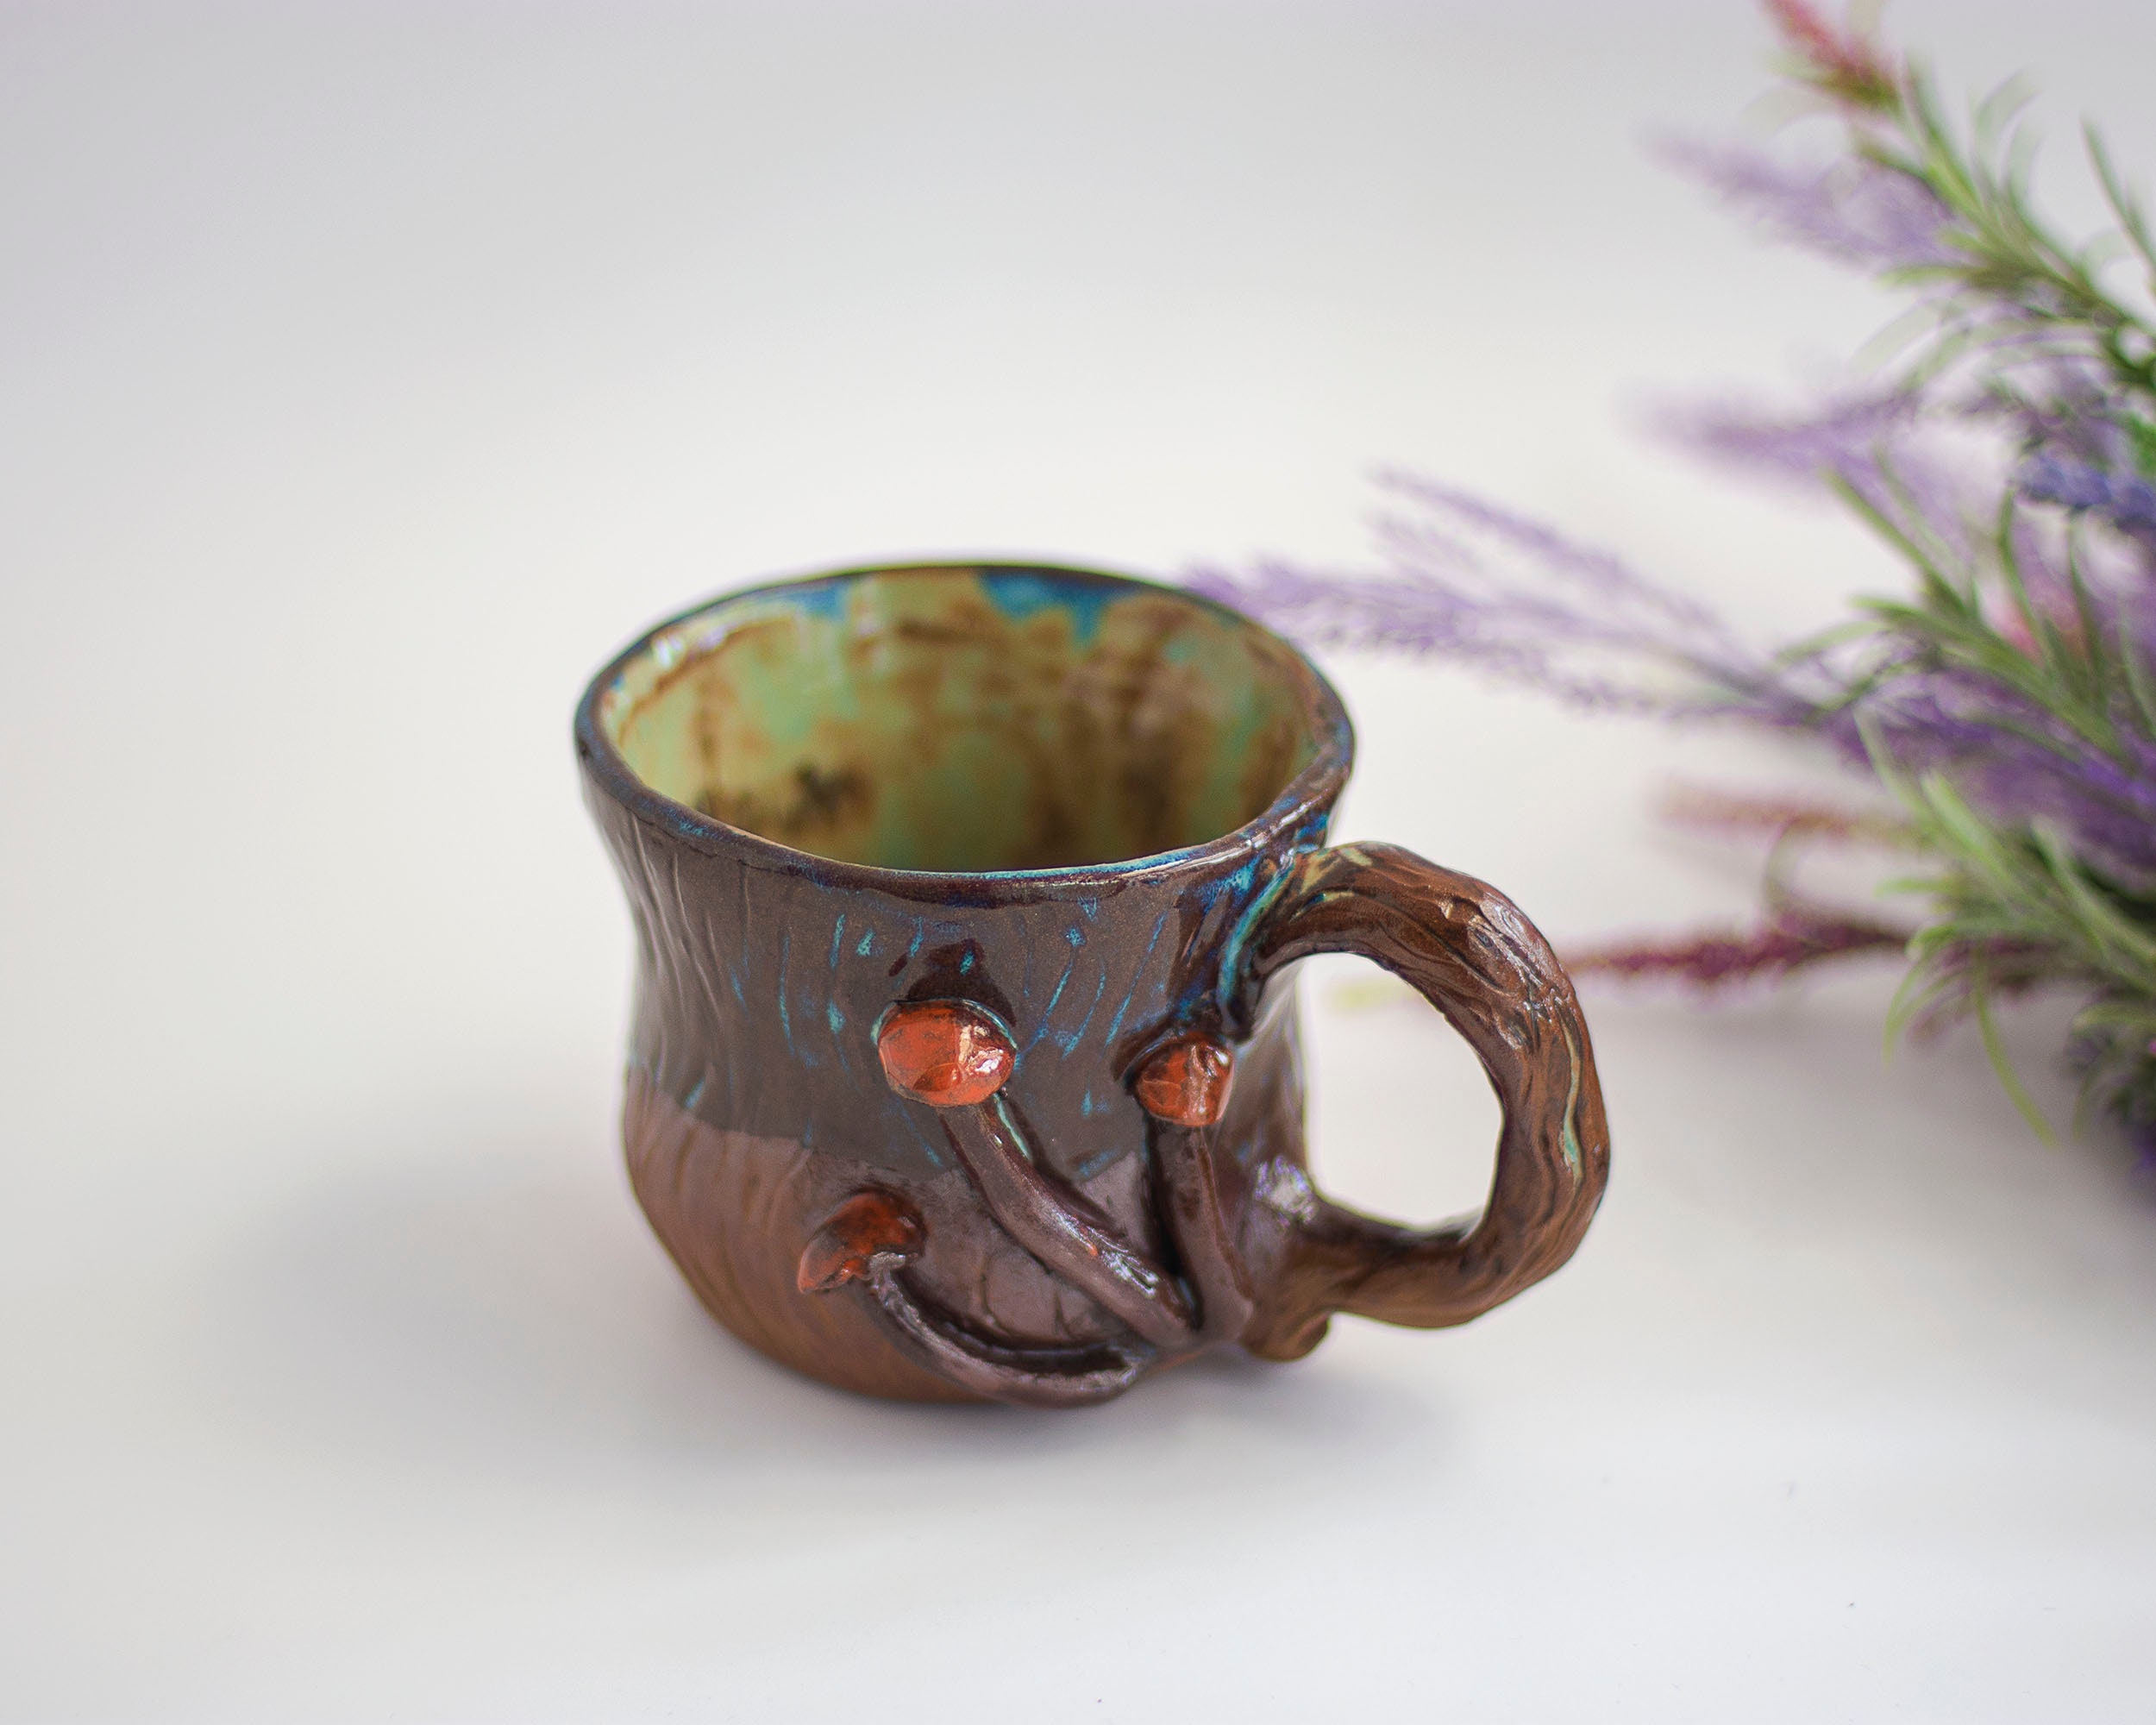 Handmade Natural Spruce Wooden Mugs – The Curiosity Cafe